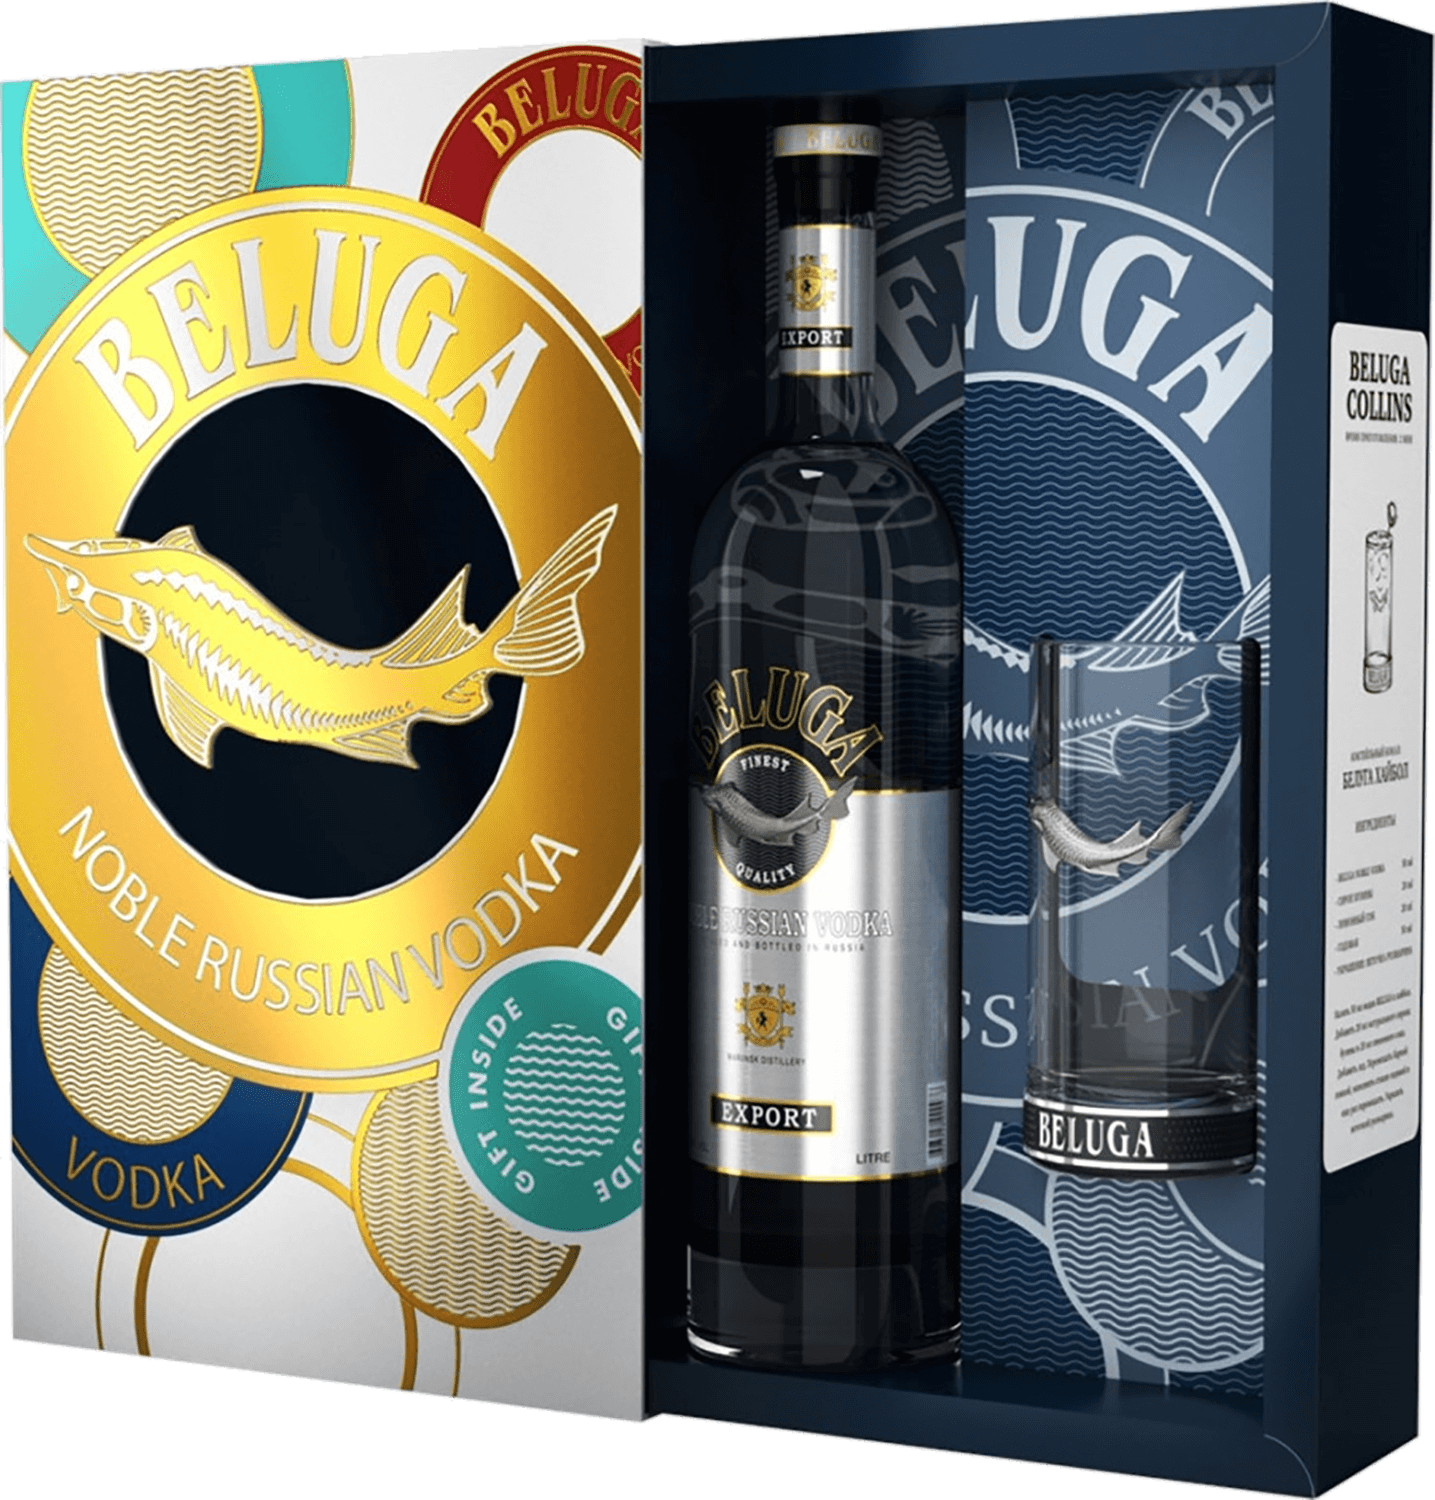 Beluga Noble (gift box with a shot) jagermeister gift box with shot